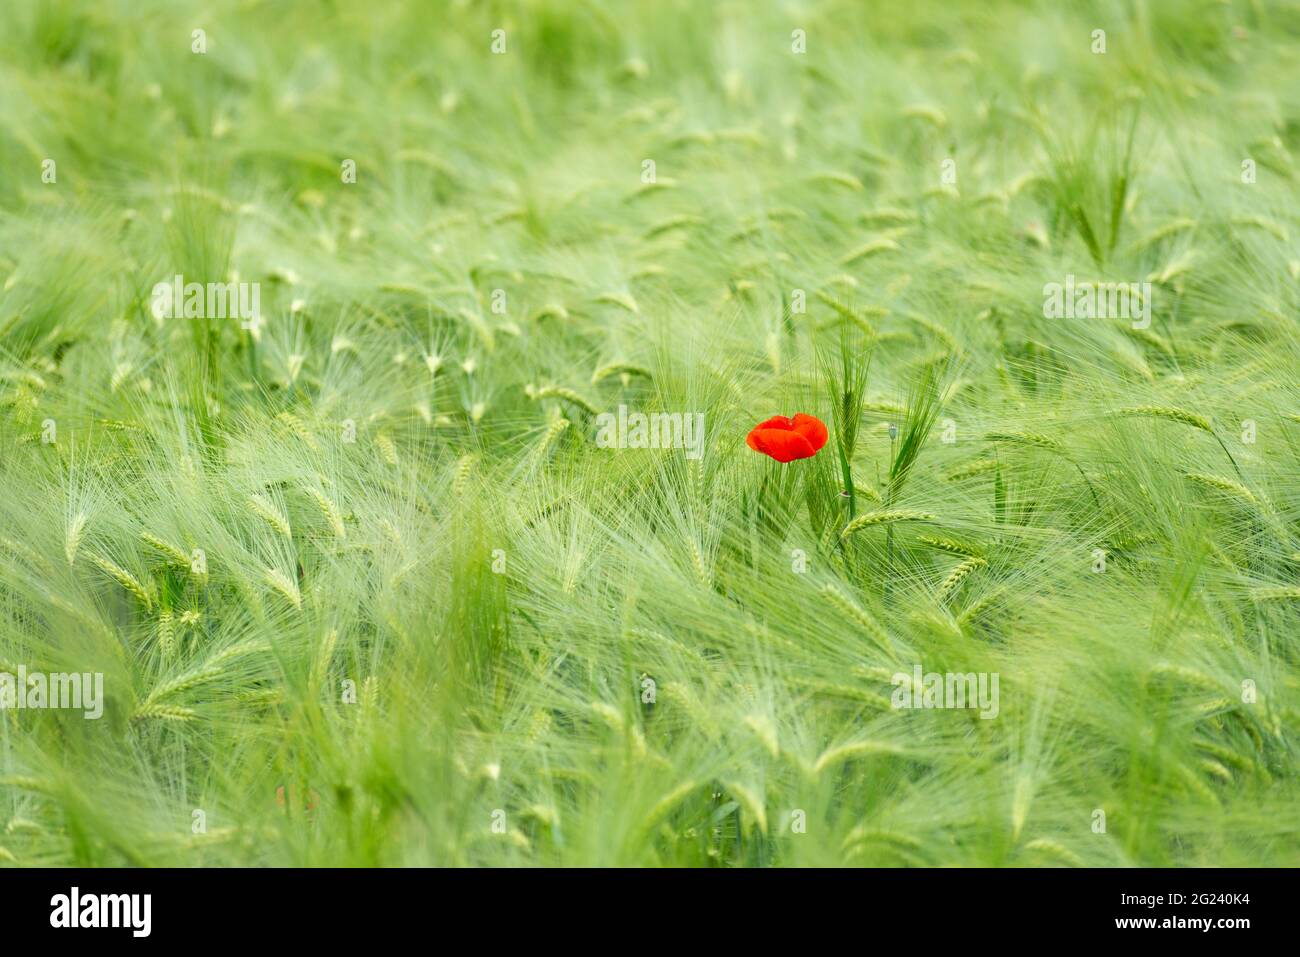 Italy, Lombardy, Countryside near Cremona,  Poppy Flower in The Grain Field Stock Photo